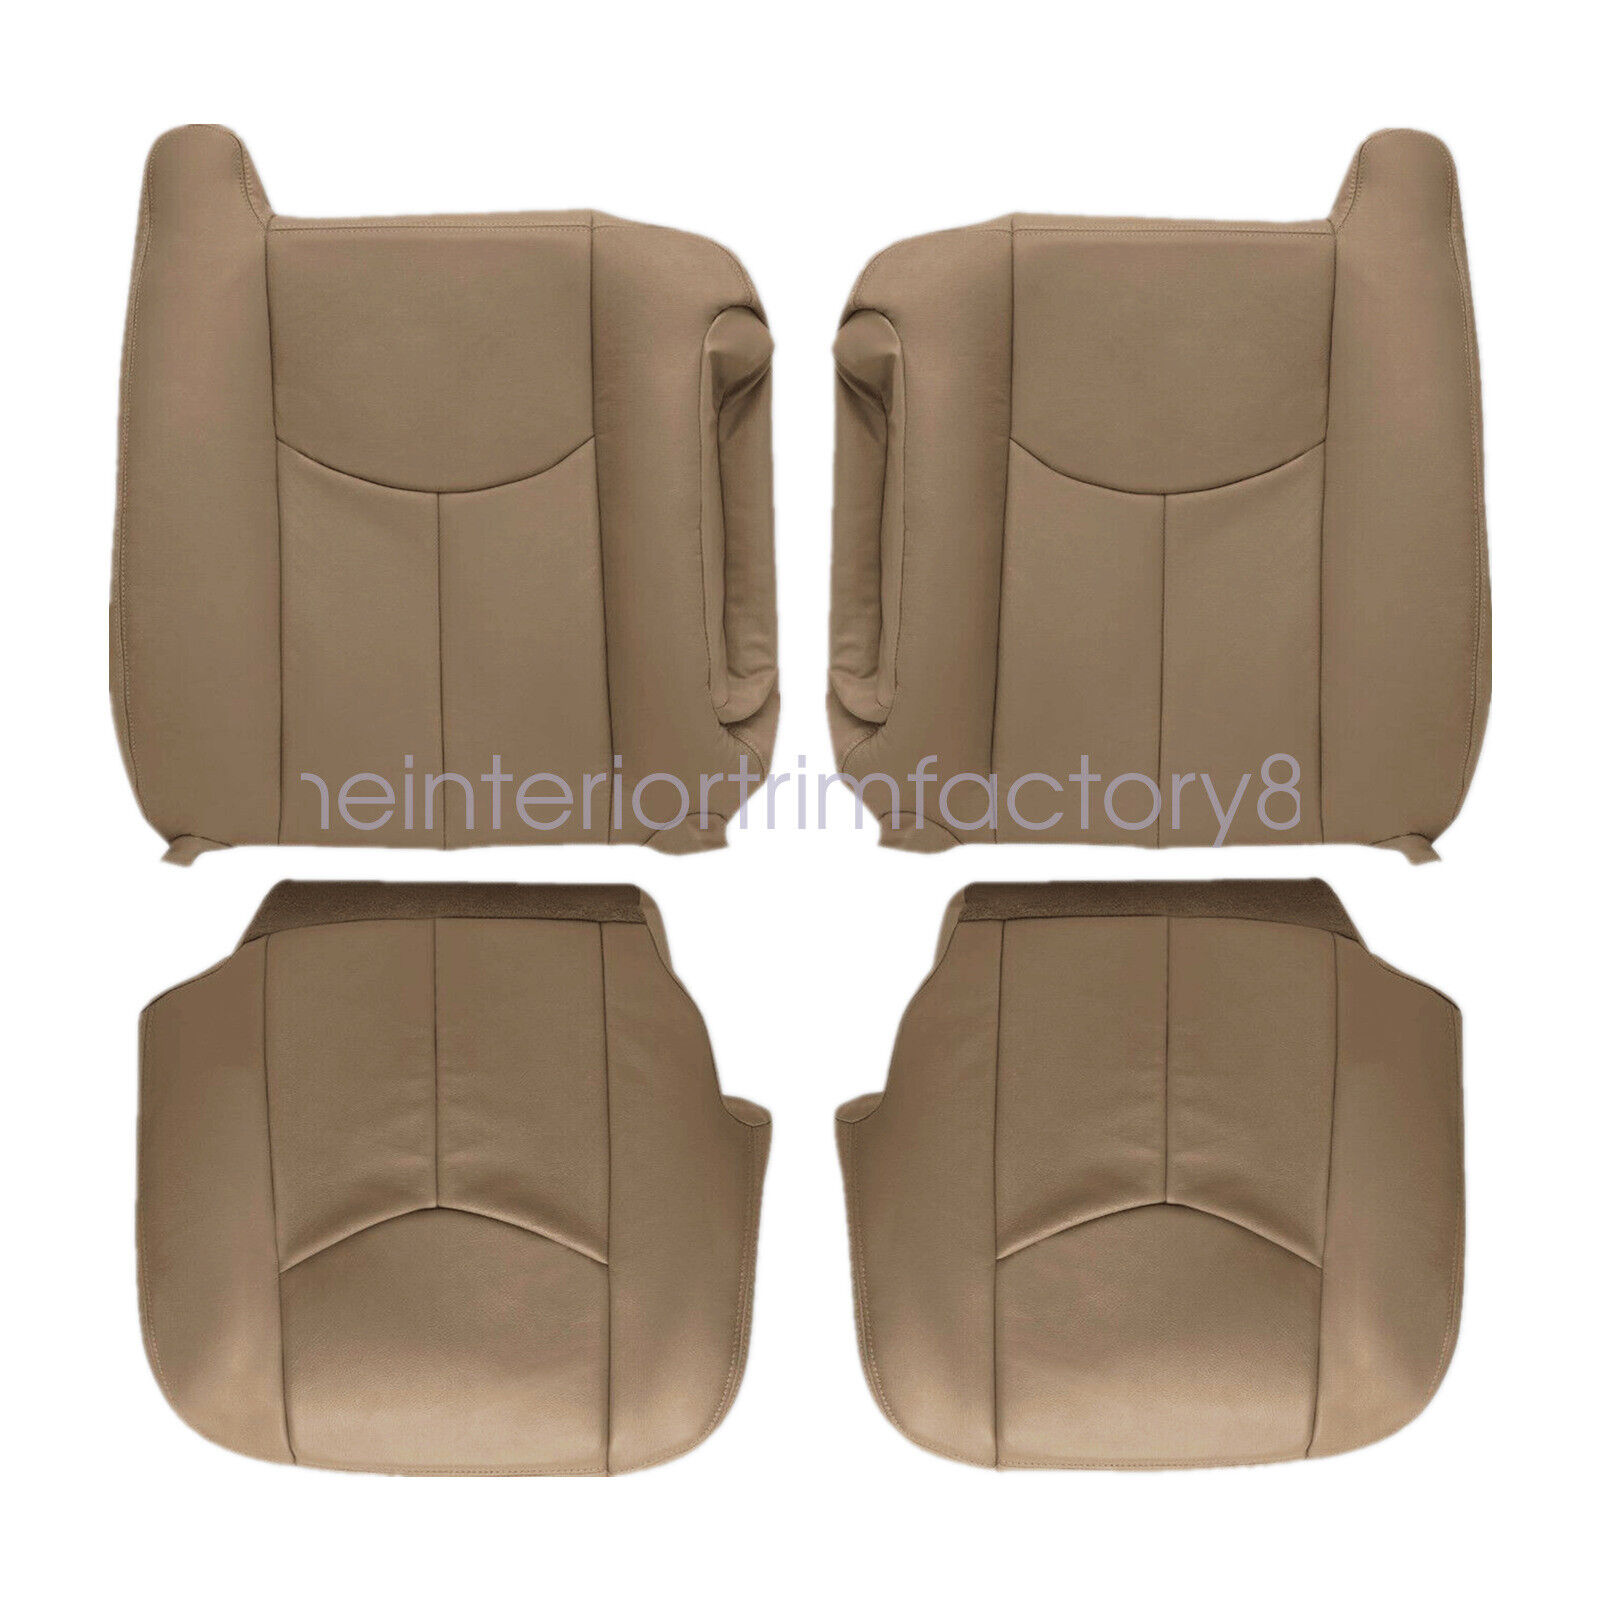 For 2003-2006 Chevy Silverado GMC Sierra Leather Bottom & Back Seat Cover Tan